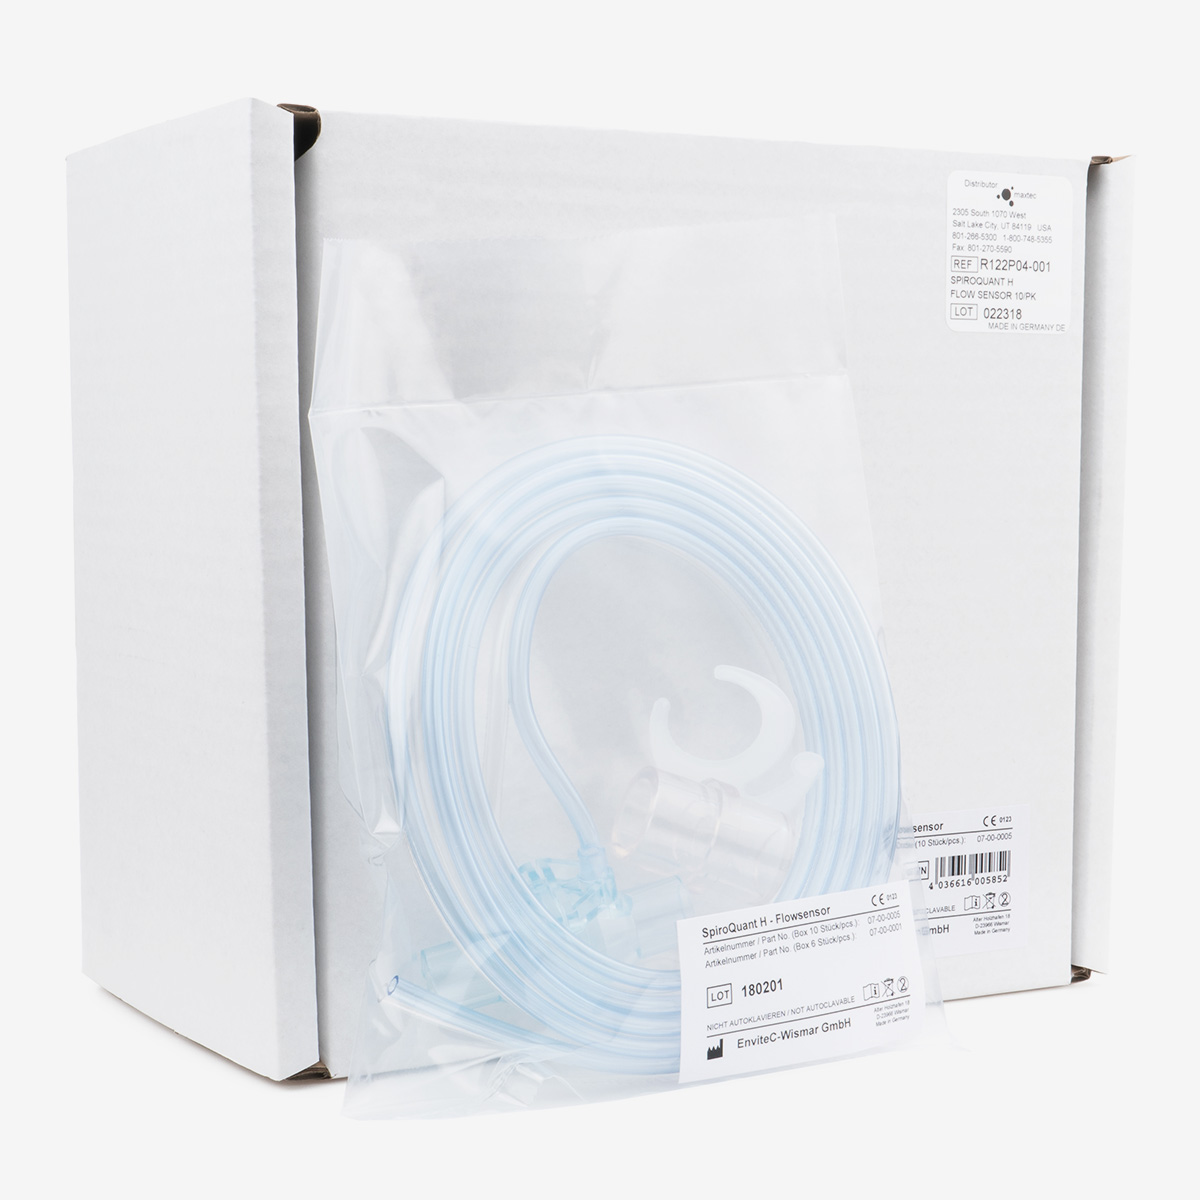 White box of 10-pack Spiroquant Flowsensor on white background